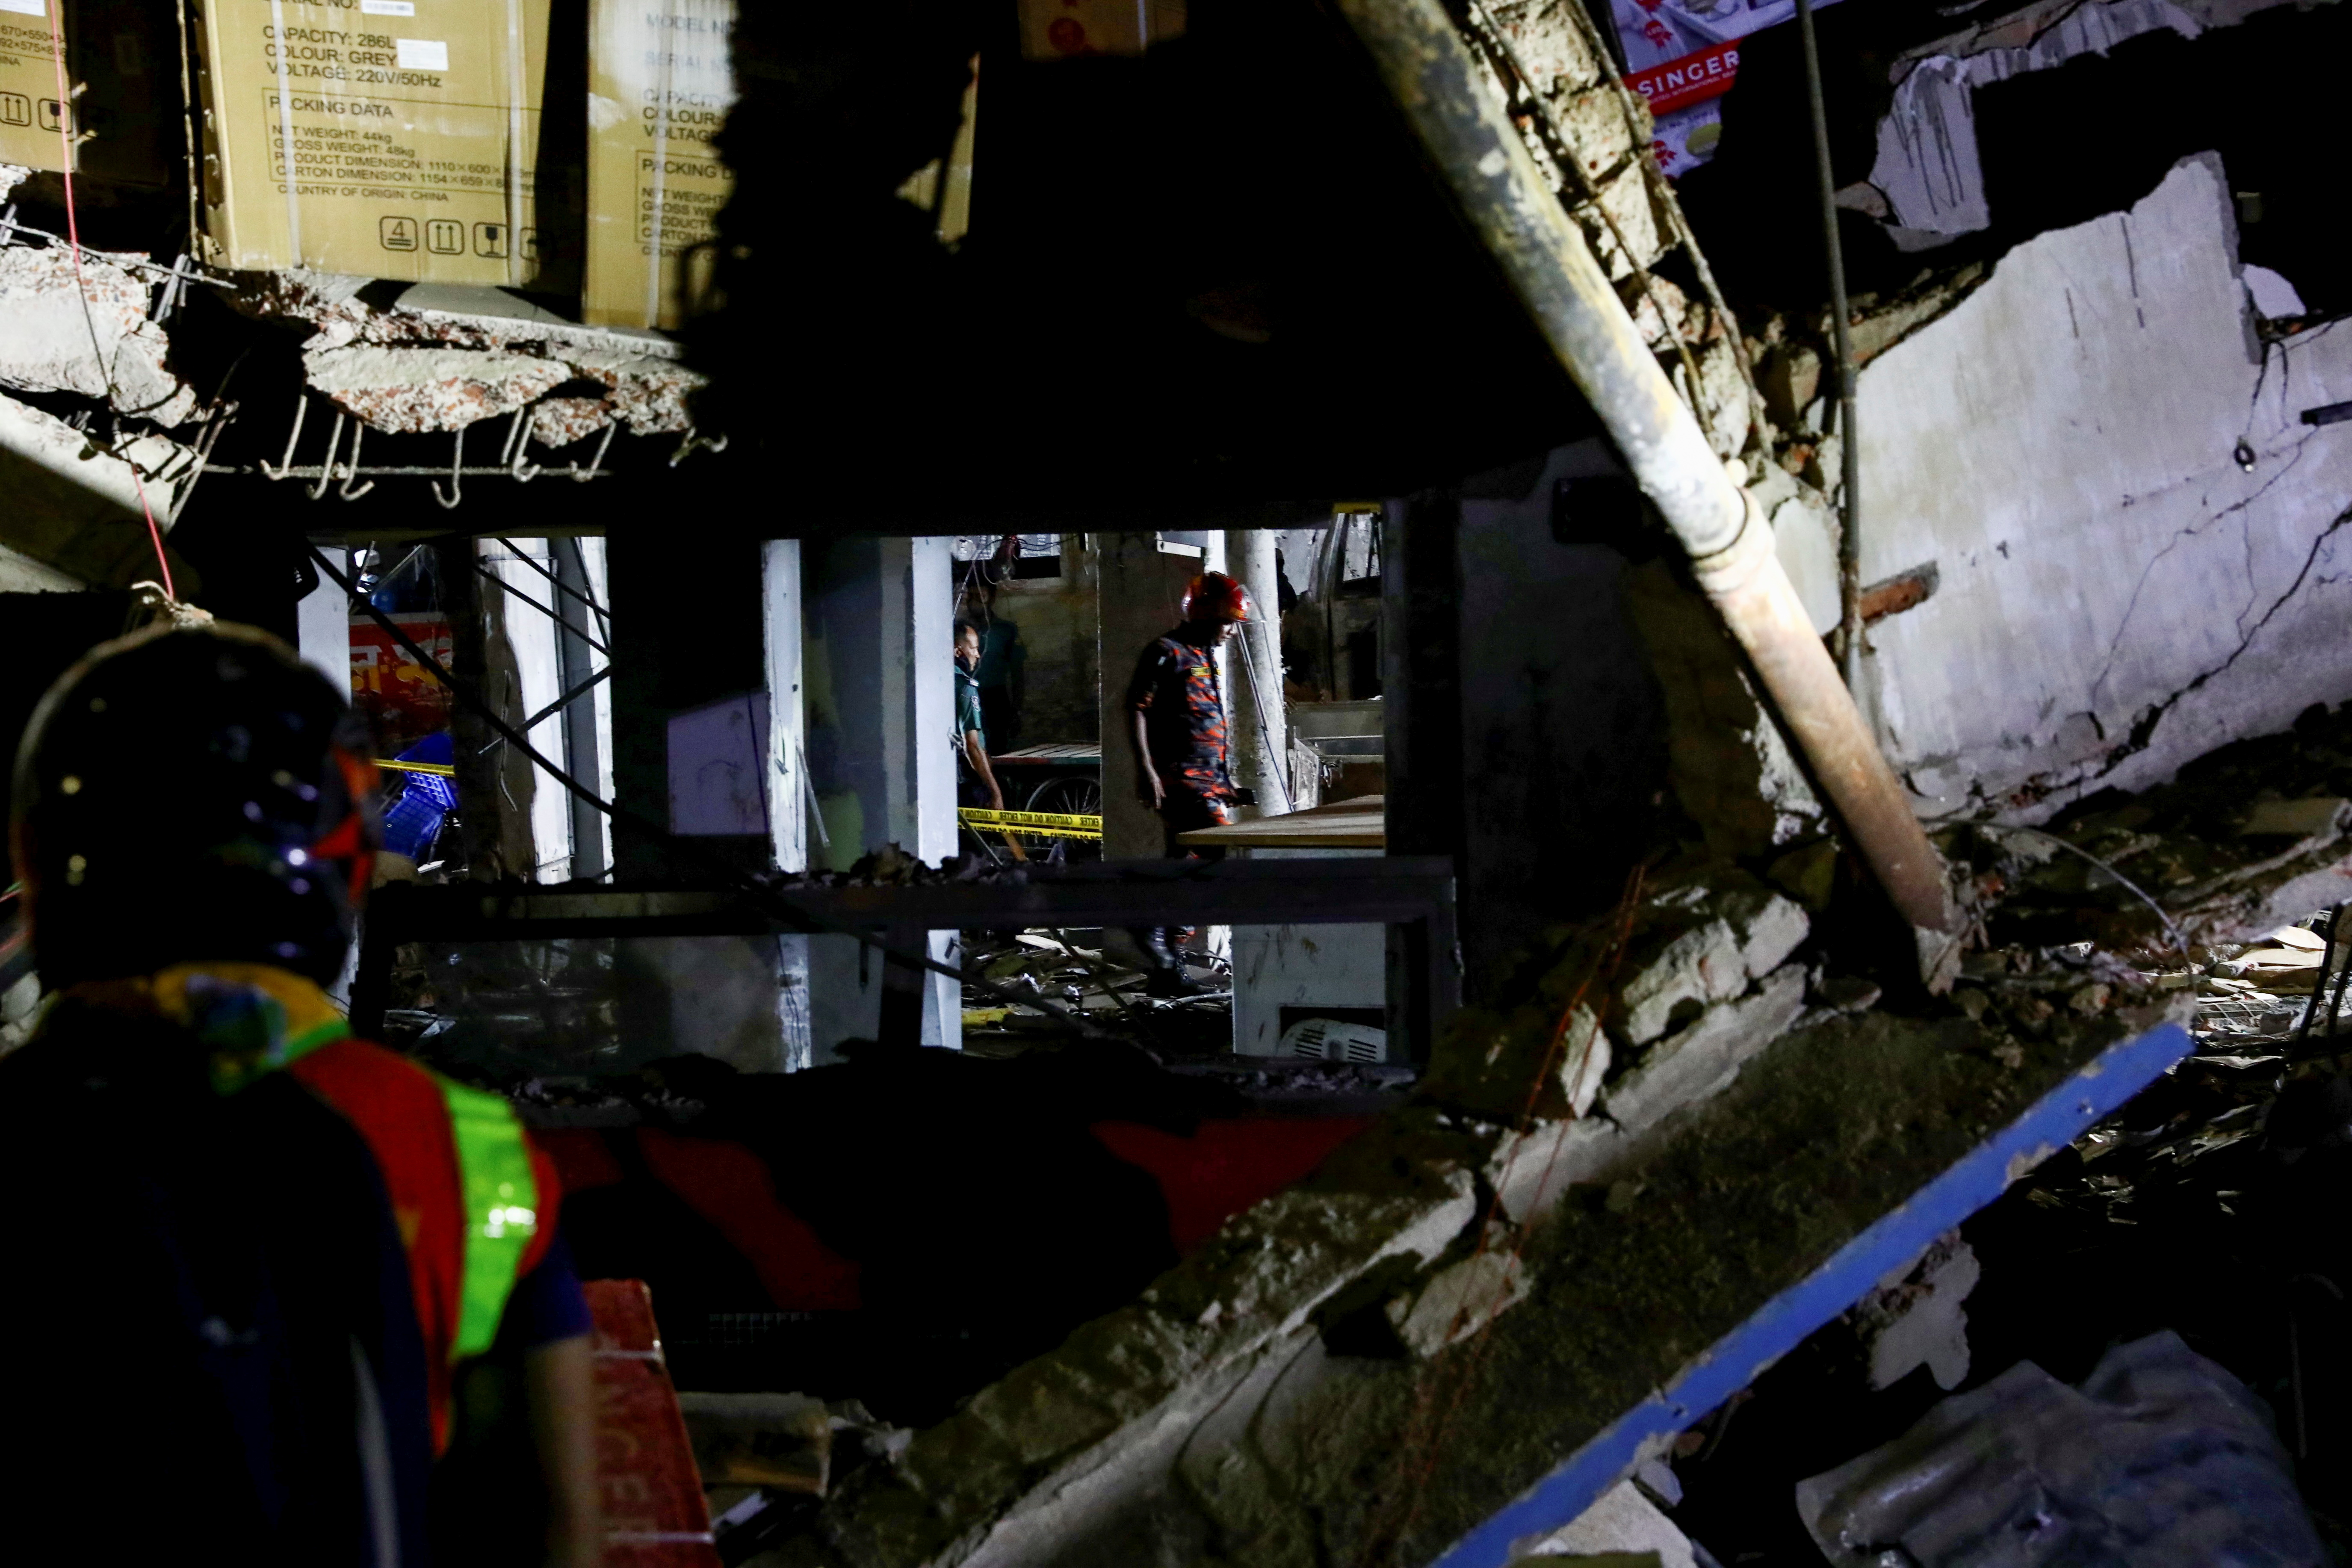 Rescue workers inspect the site after a blast in a shop that killed several people in Dhaka